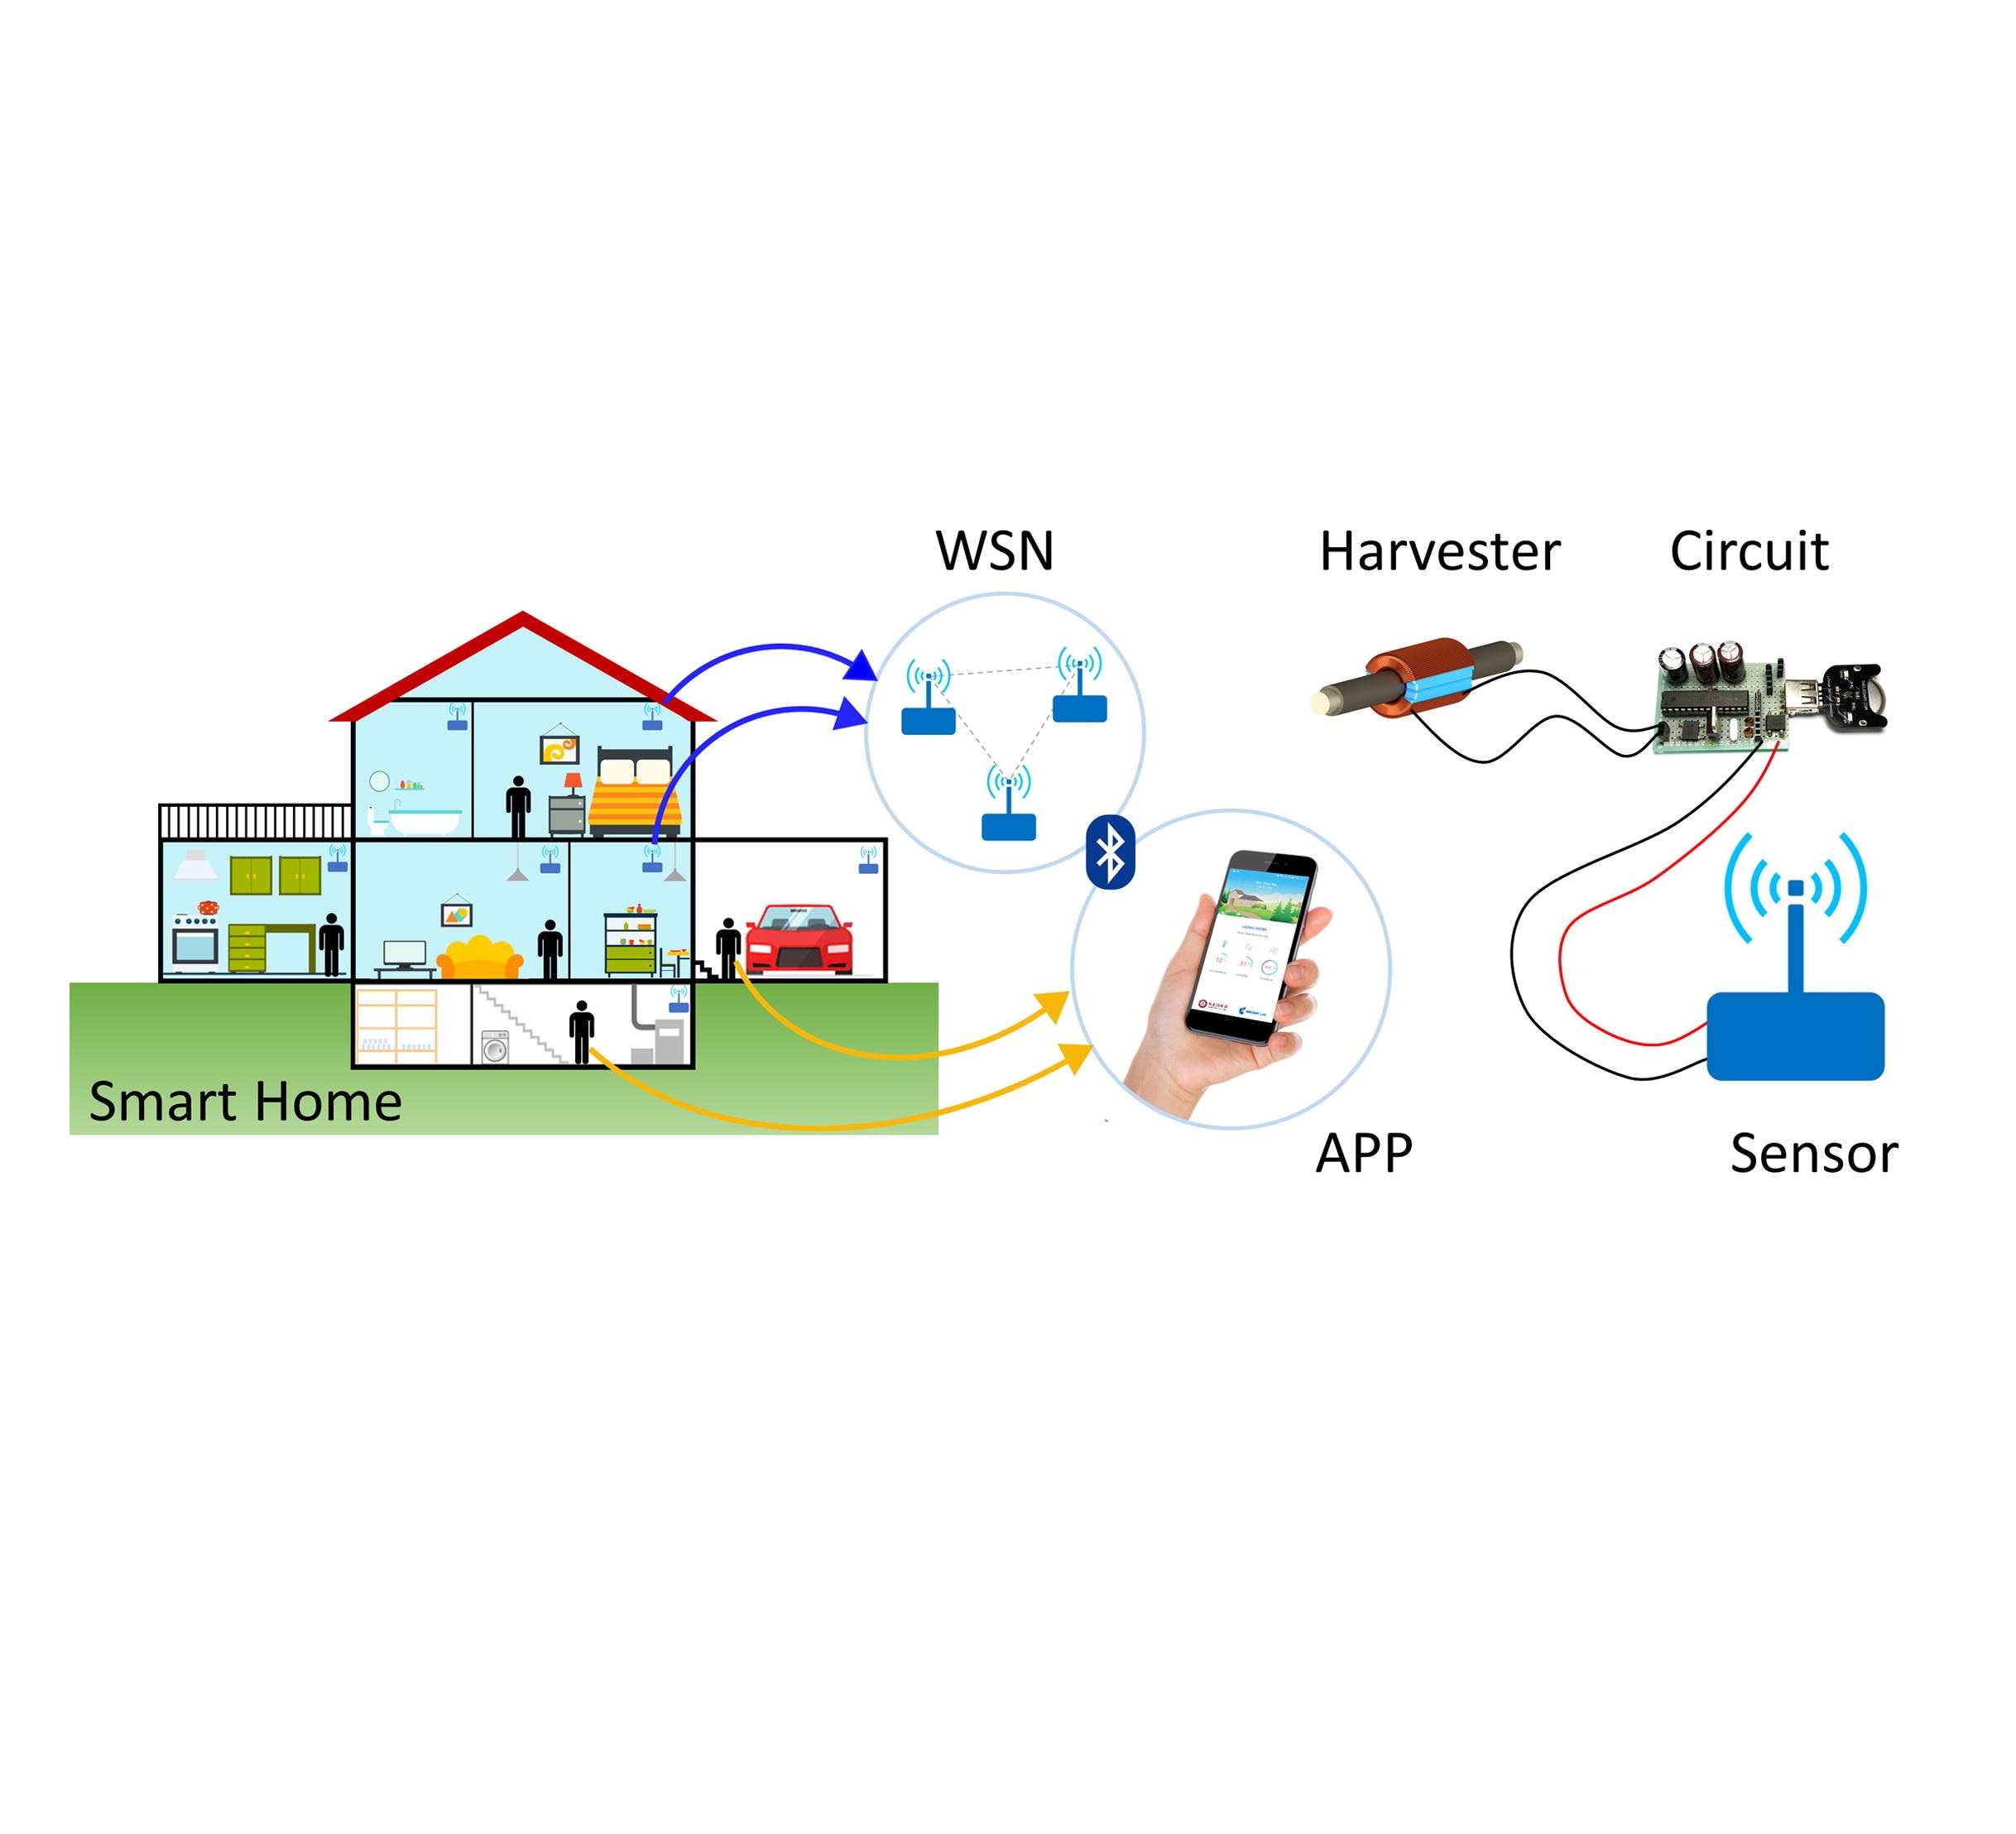 An Indoor Power Line based Magnetic Field Energy Harvester for Self-Powered Wireless Sensors in Smart Home Applications